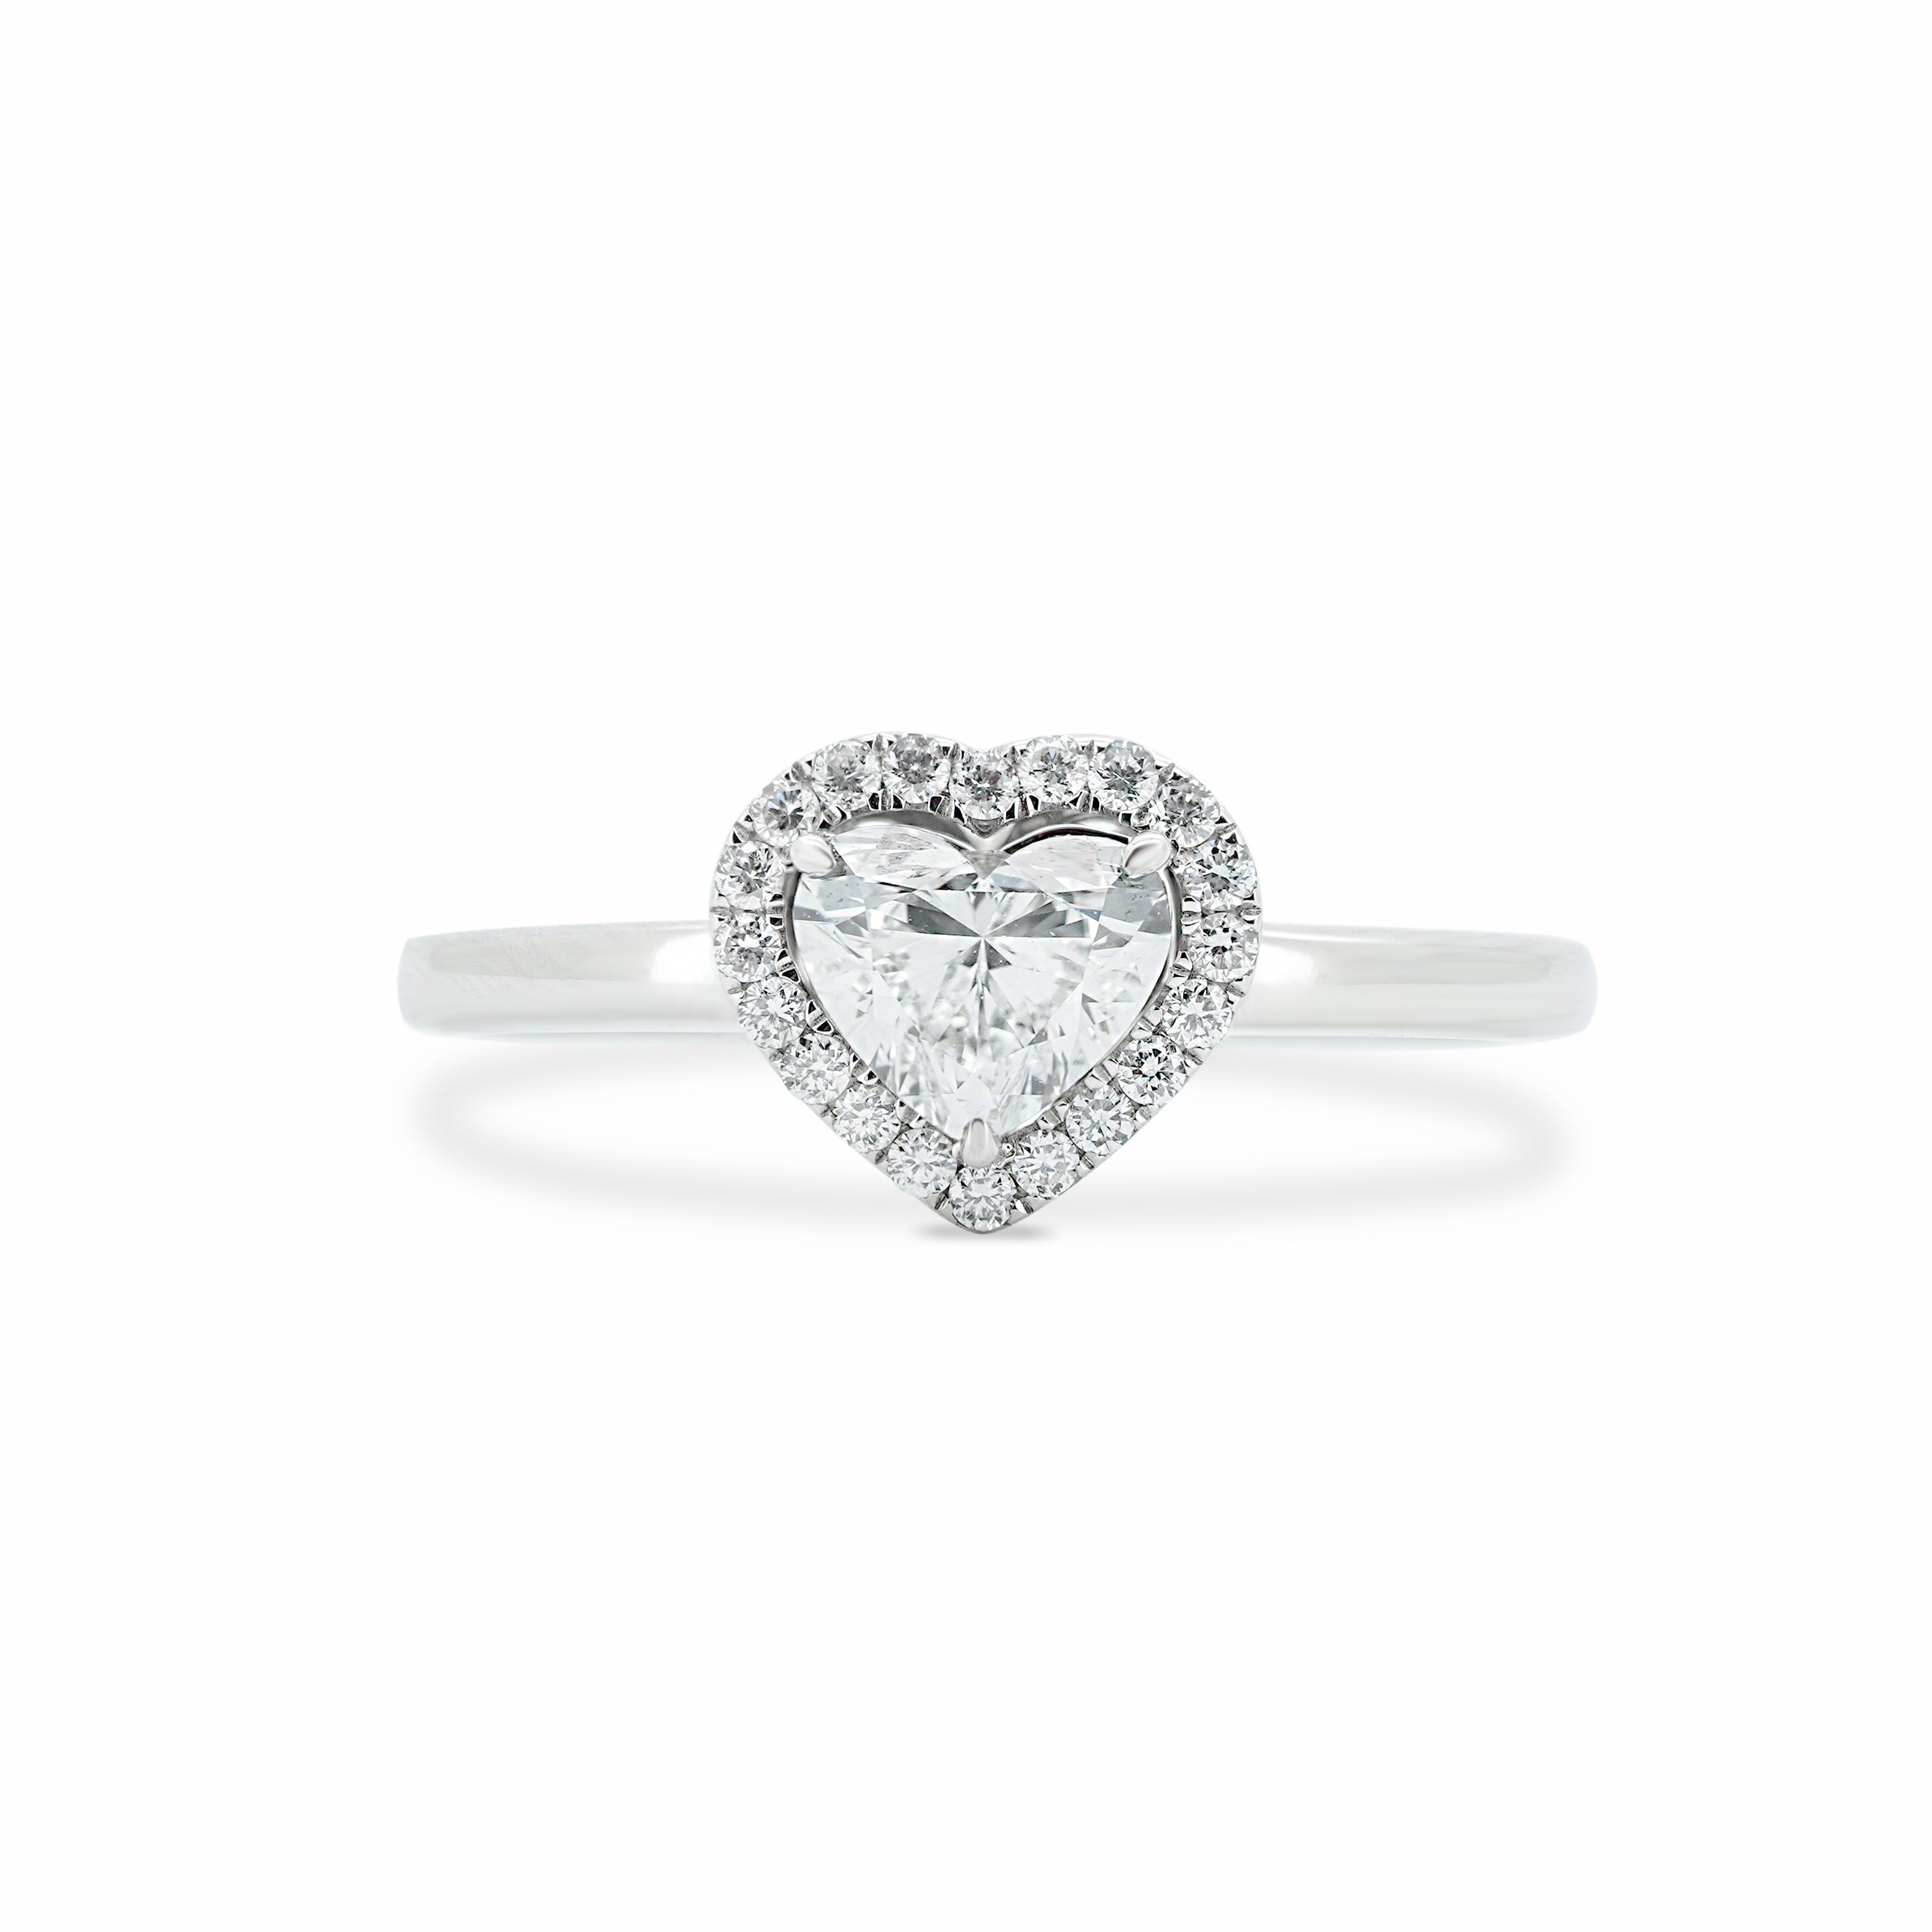 Heart Diamond Ring With Halo | Sol et Terre